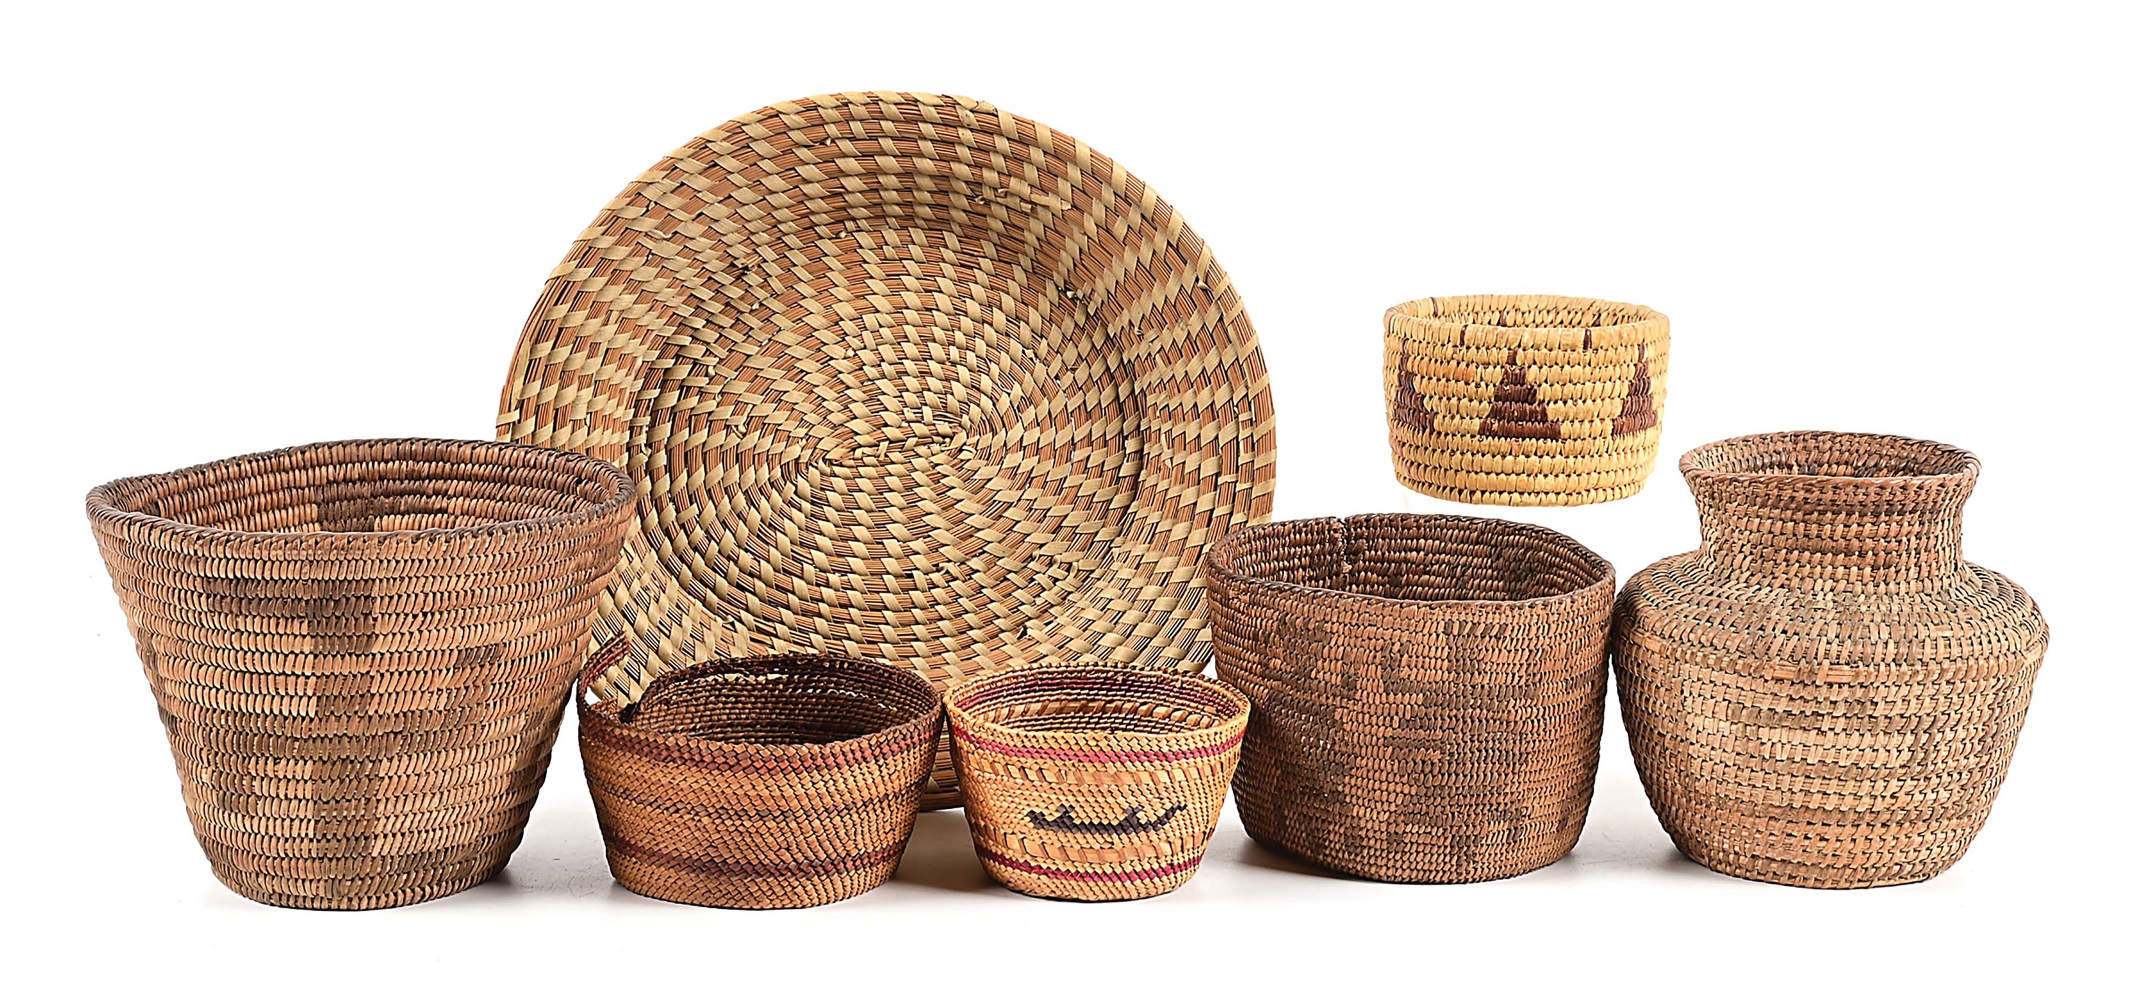 LOT OF 7 NATIVE AMERICAN BASKETS